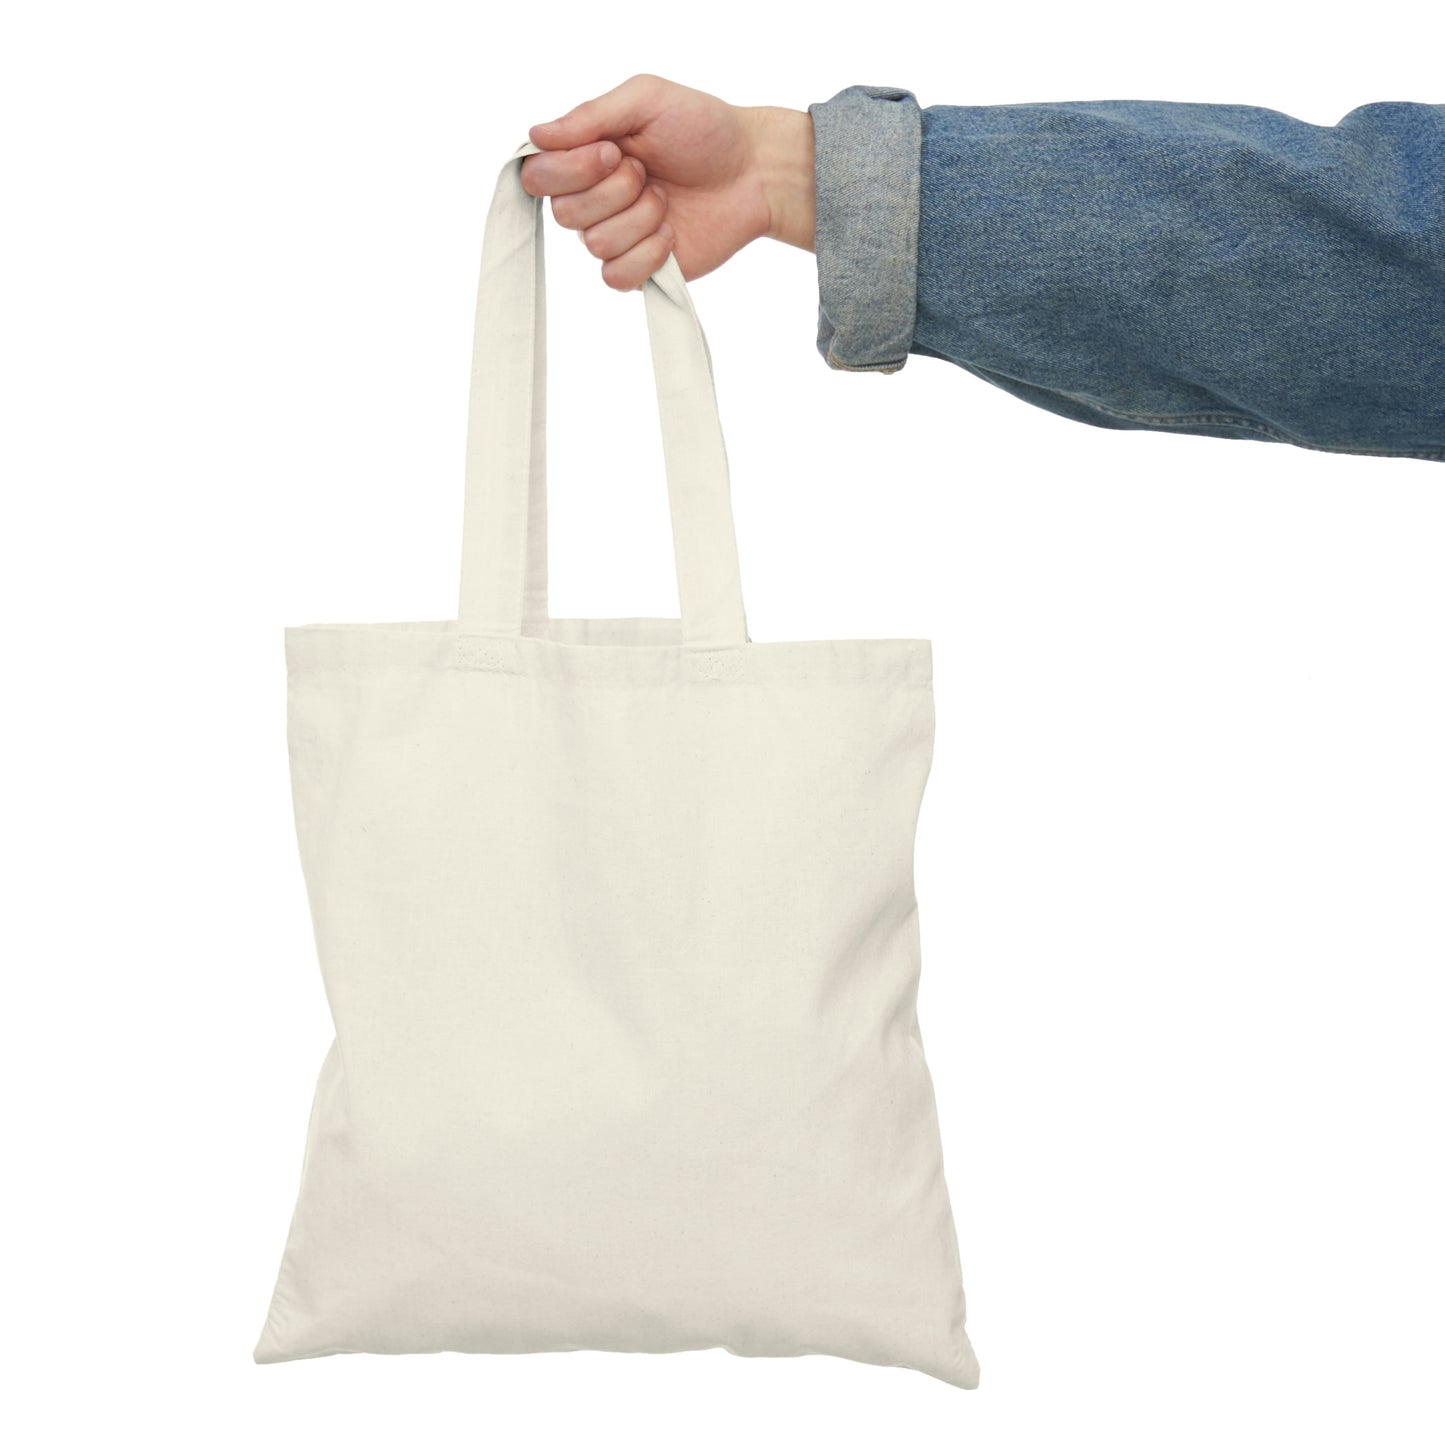 The Unlikely Occultist - Natural Tote Bag